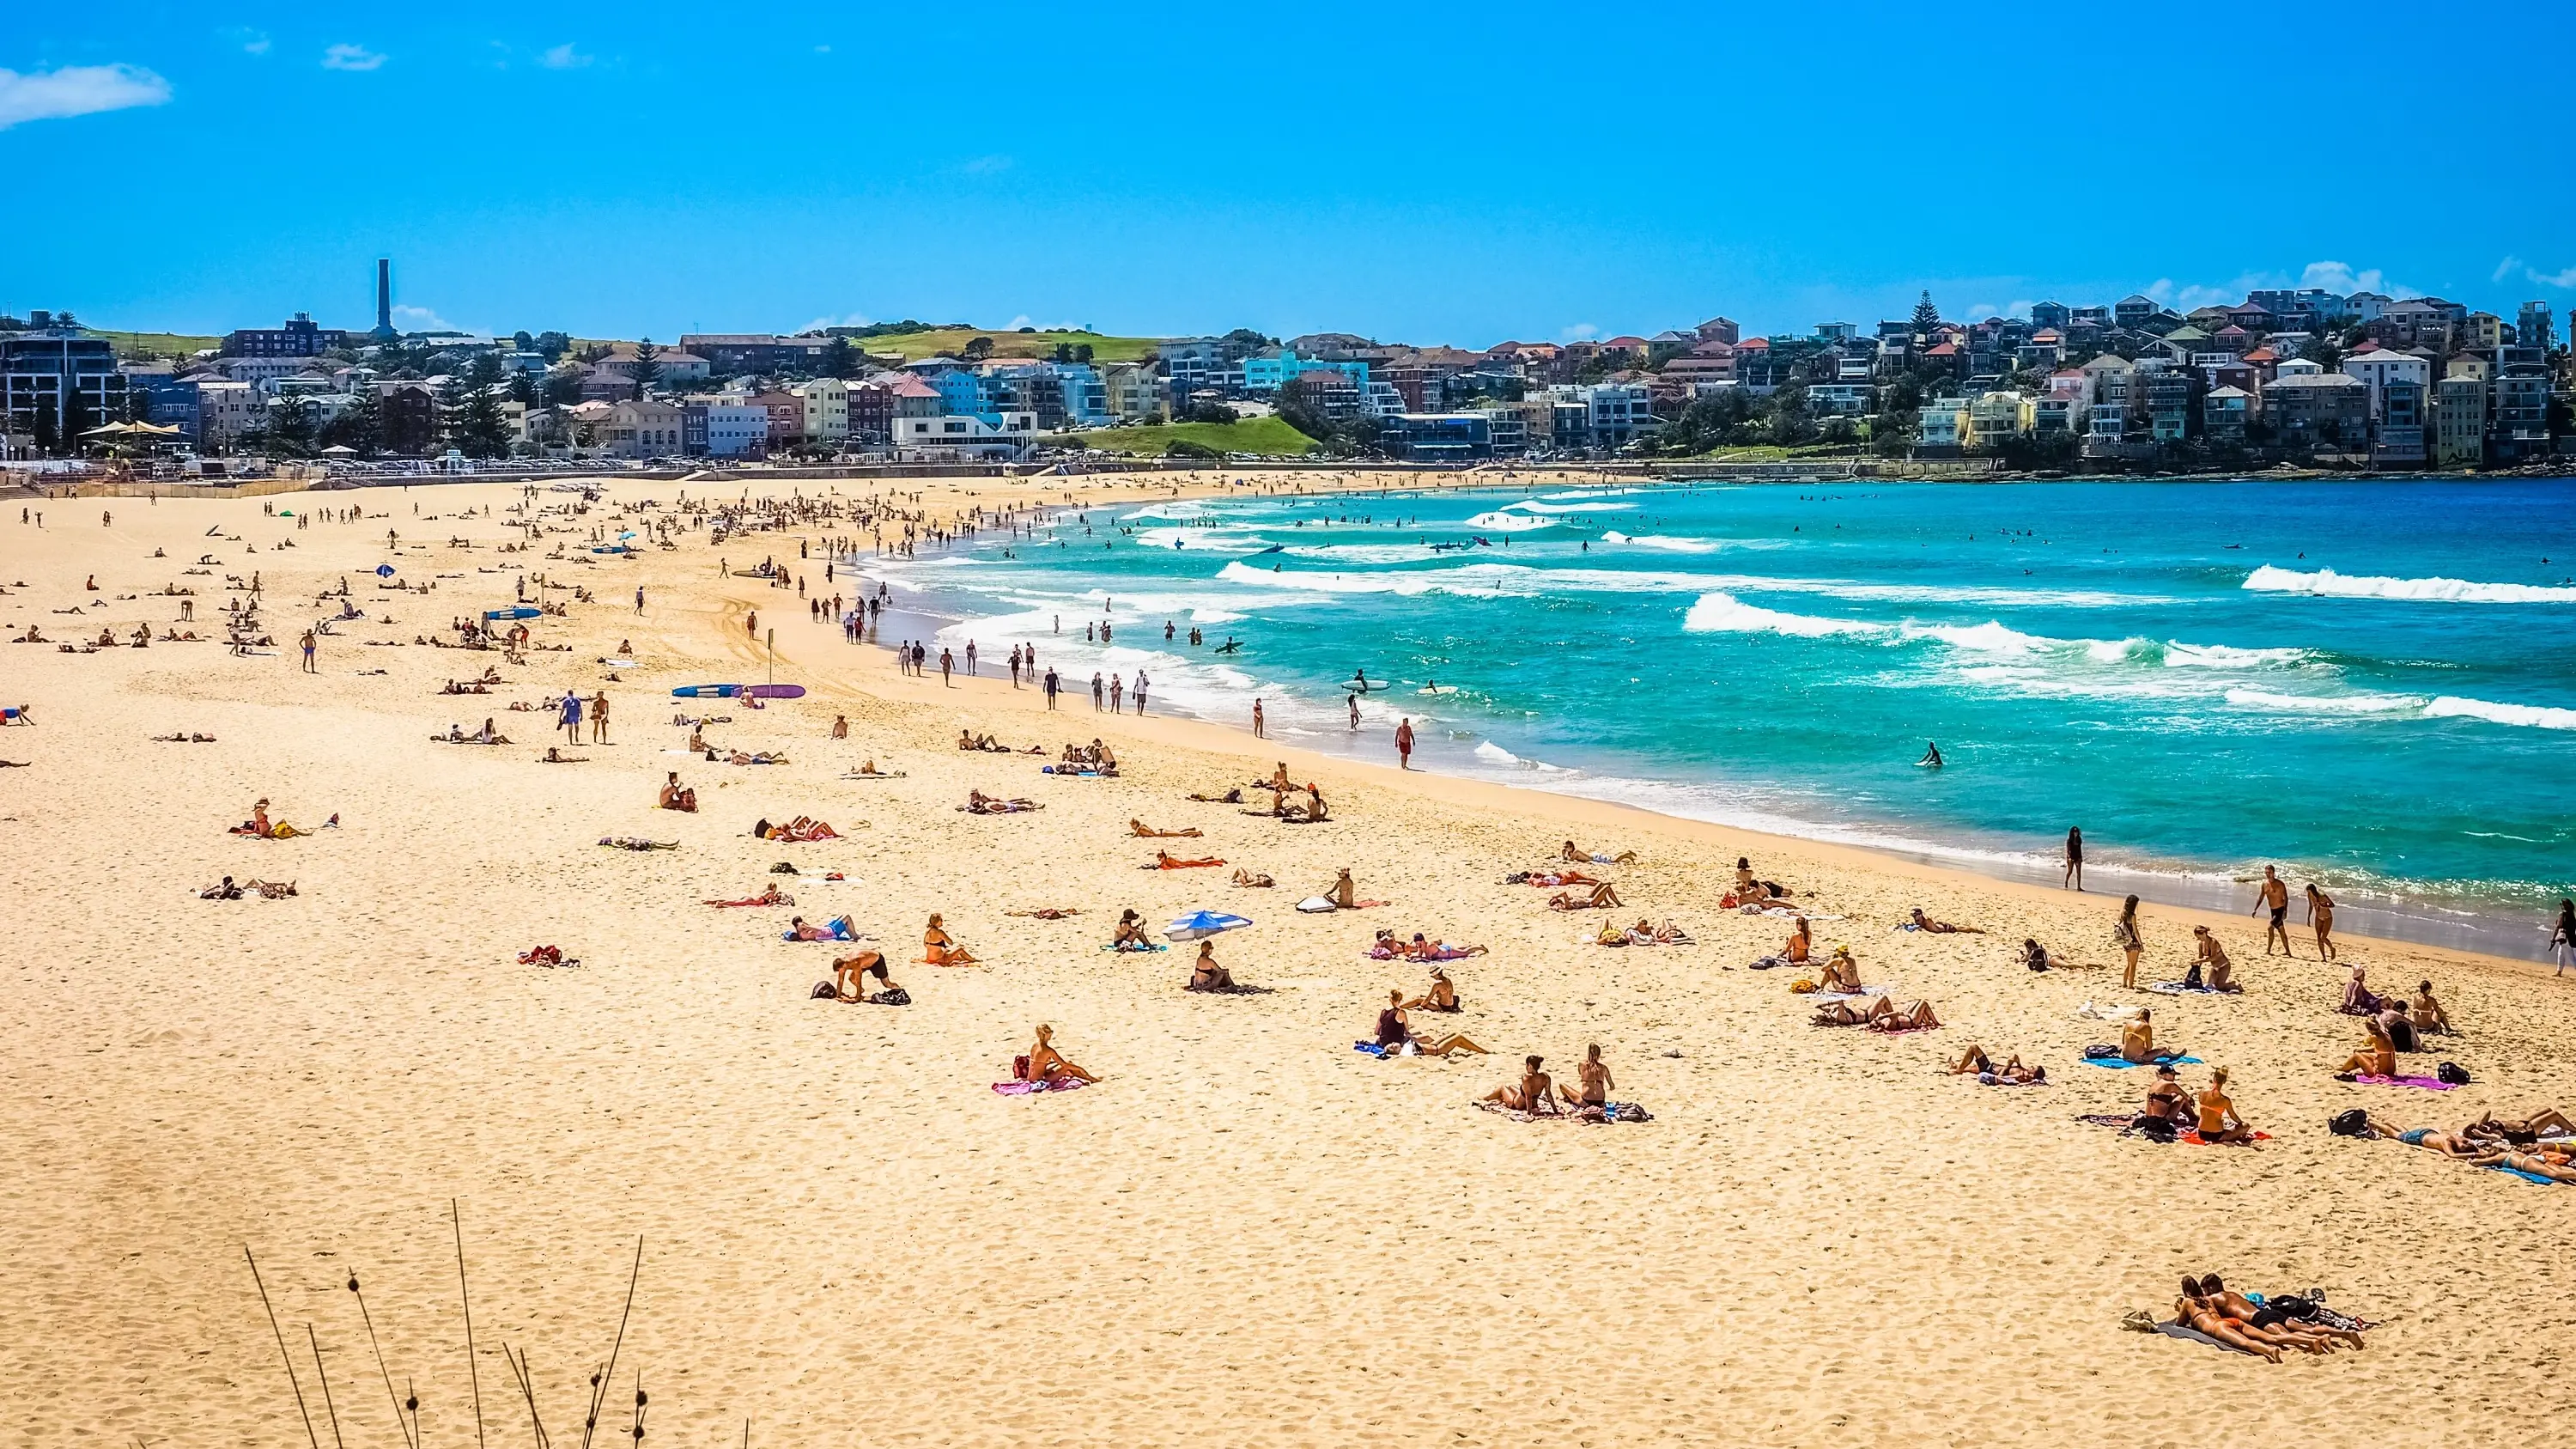 Bondi Beach on a sunny day with people sitting on the sand. Image credit: Shutterstock